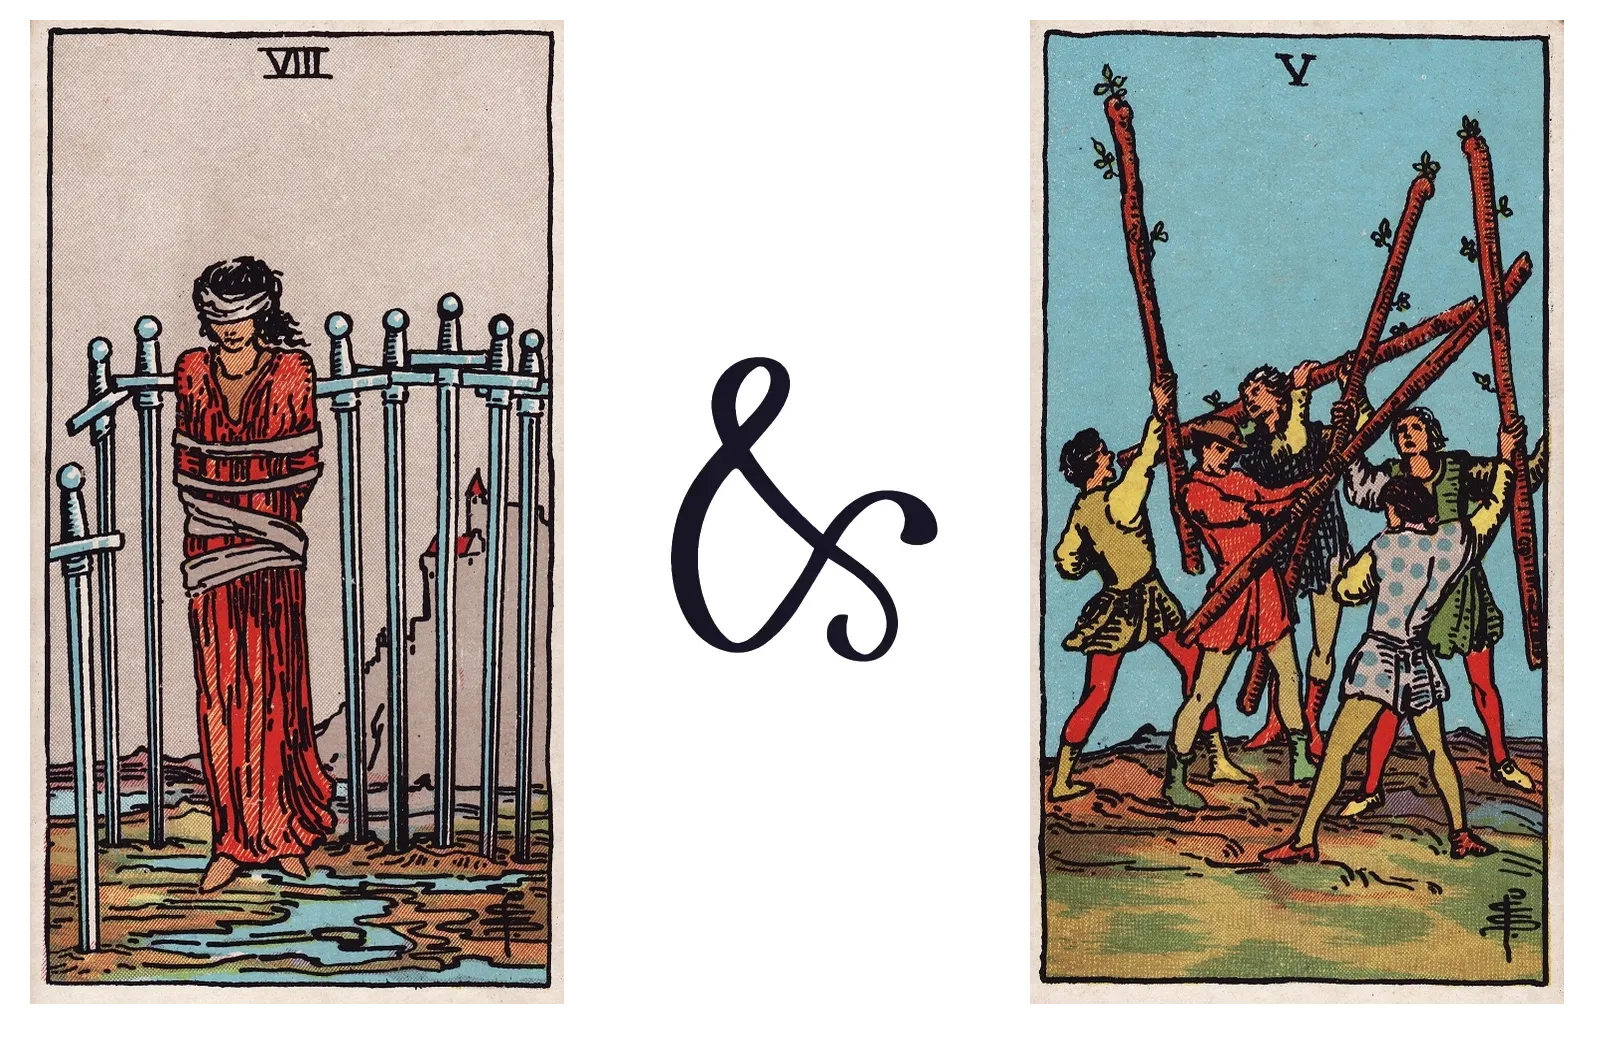 Eight of Swords and Five of Wands